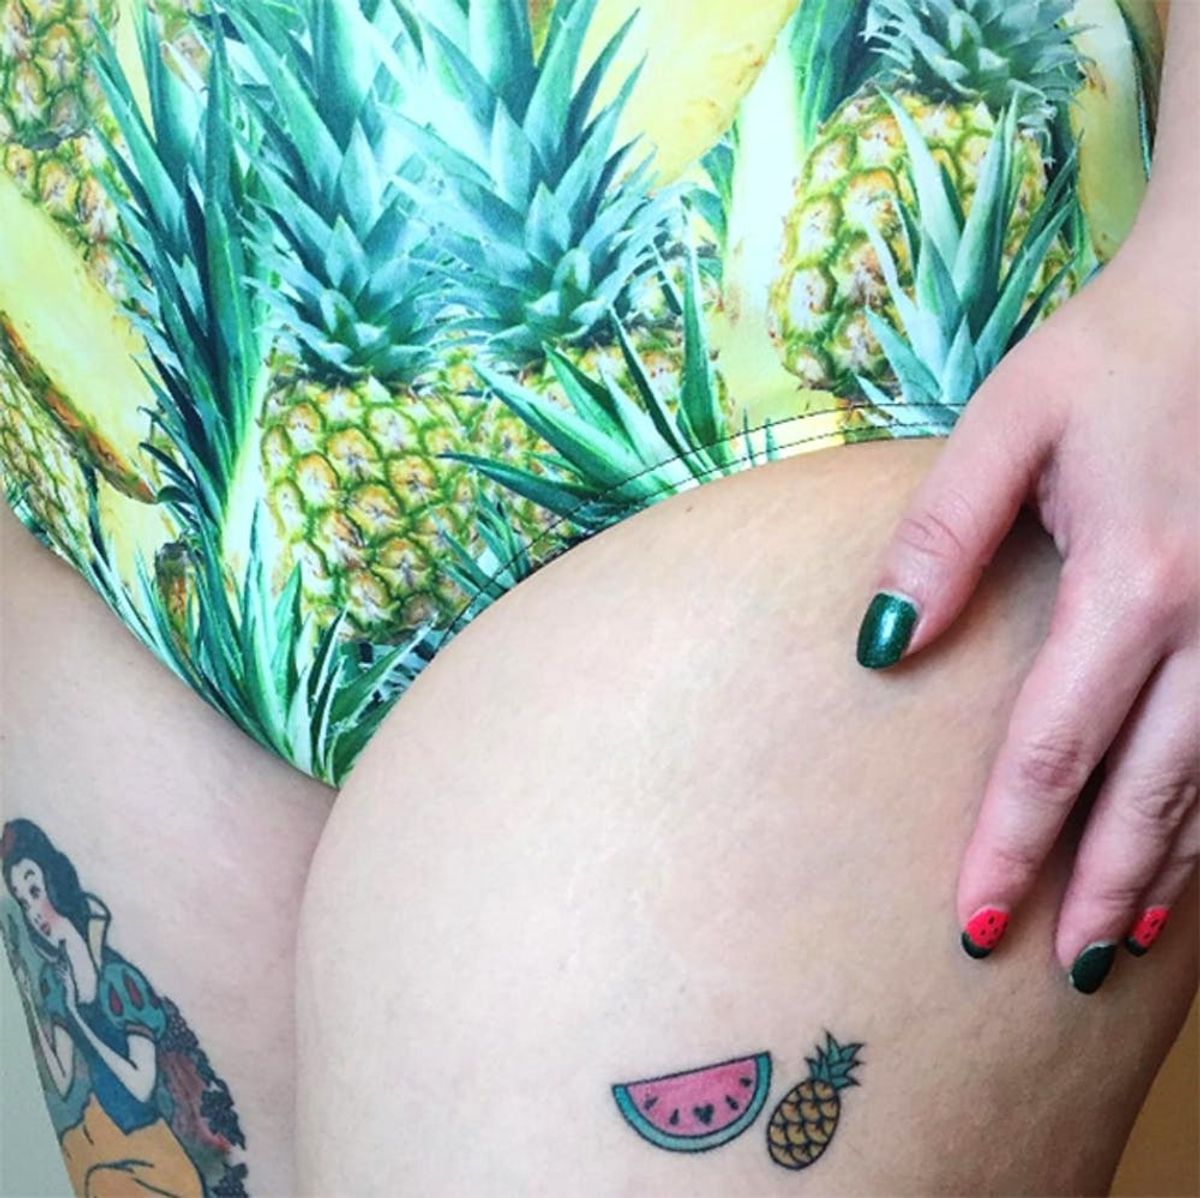 13 Tiny Summer-Inspired Tattoos You Can Show Off With Your Swimsuit